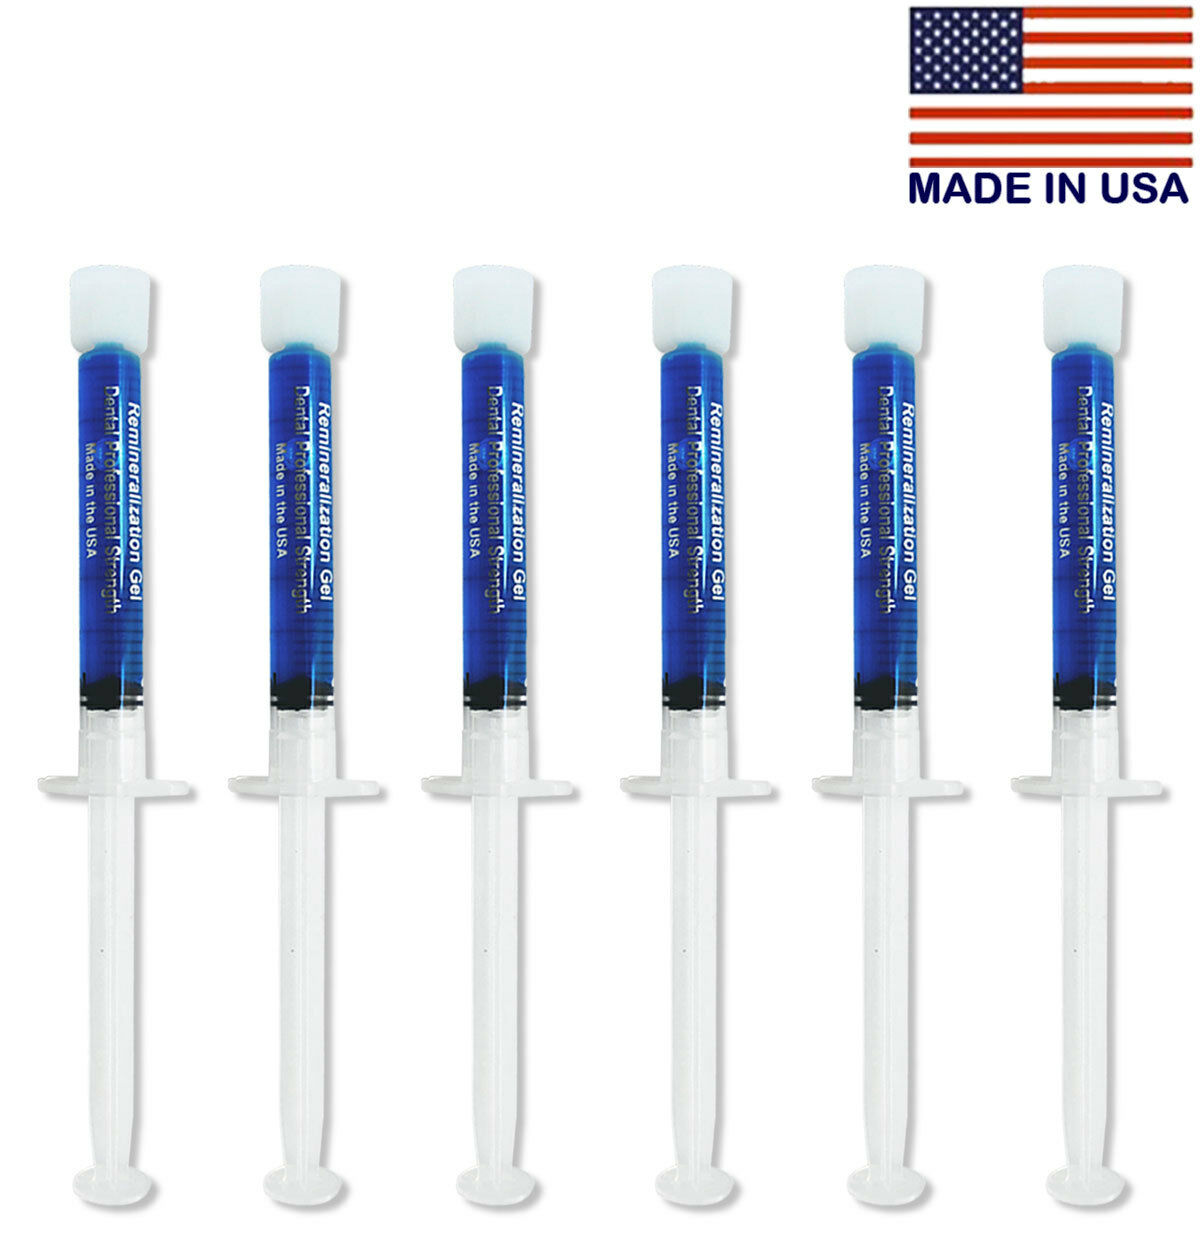 6 Syringes Of Remineralization Gel For After Teeth Whitening Less Sensitivity